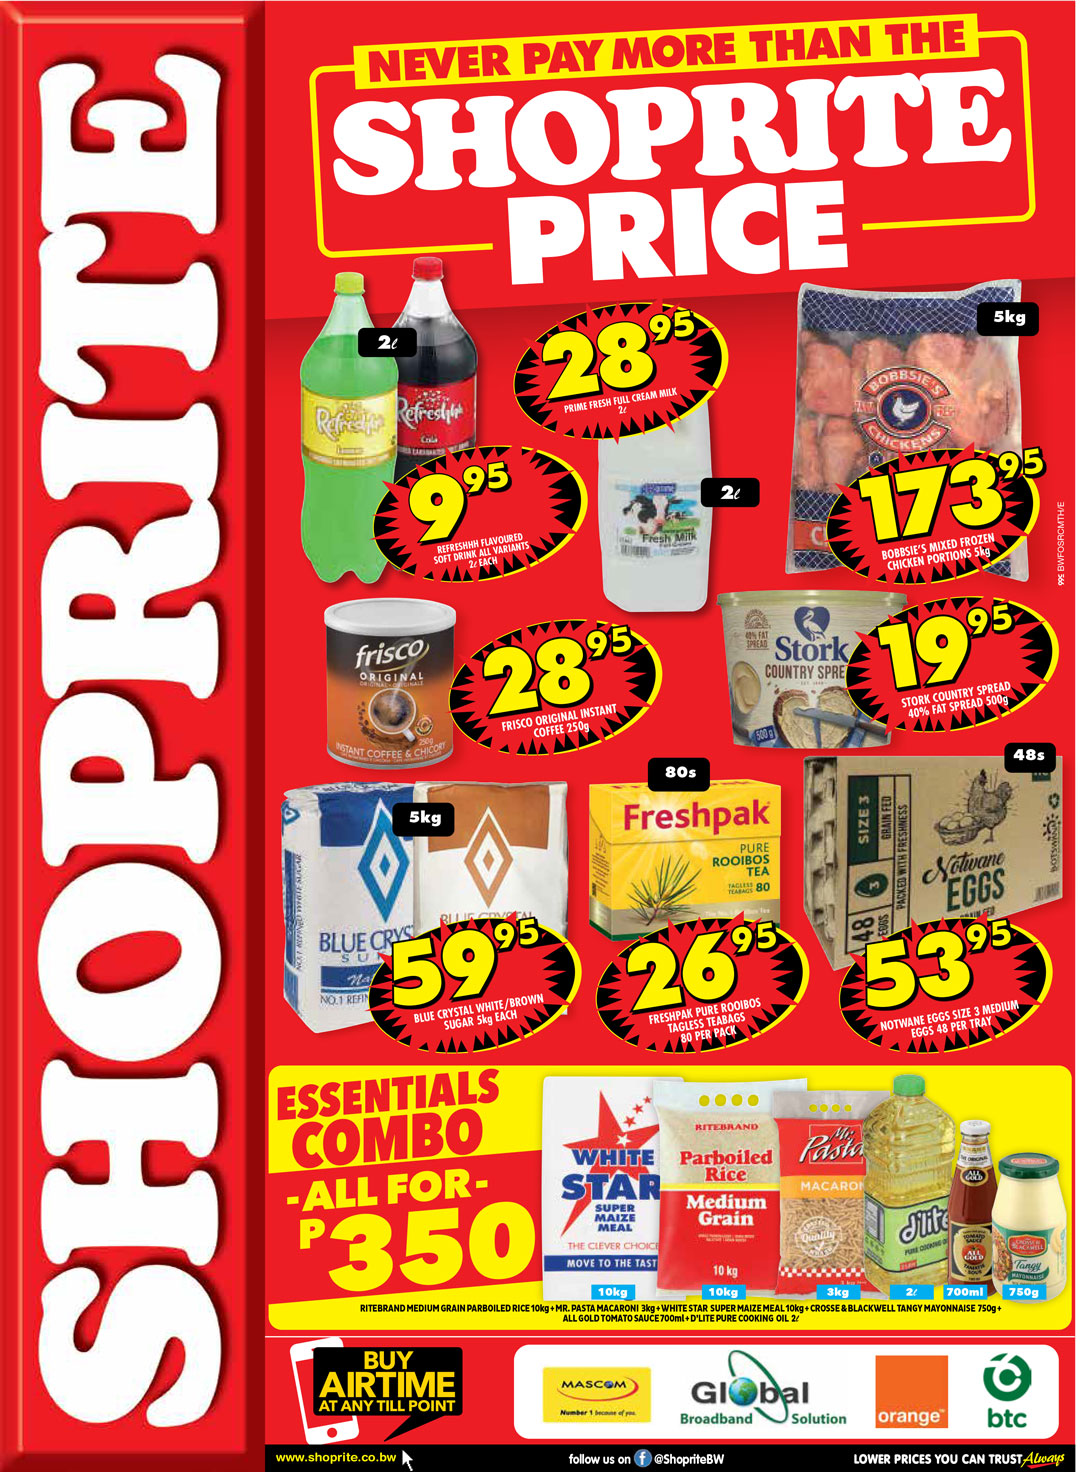 Shoprite Promotions - Game City Life Style Mall